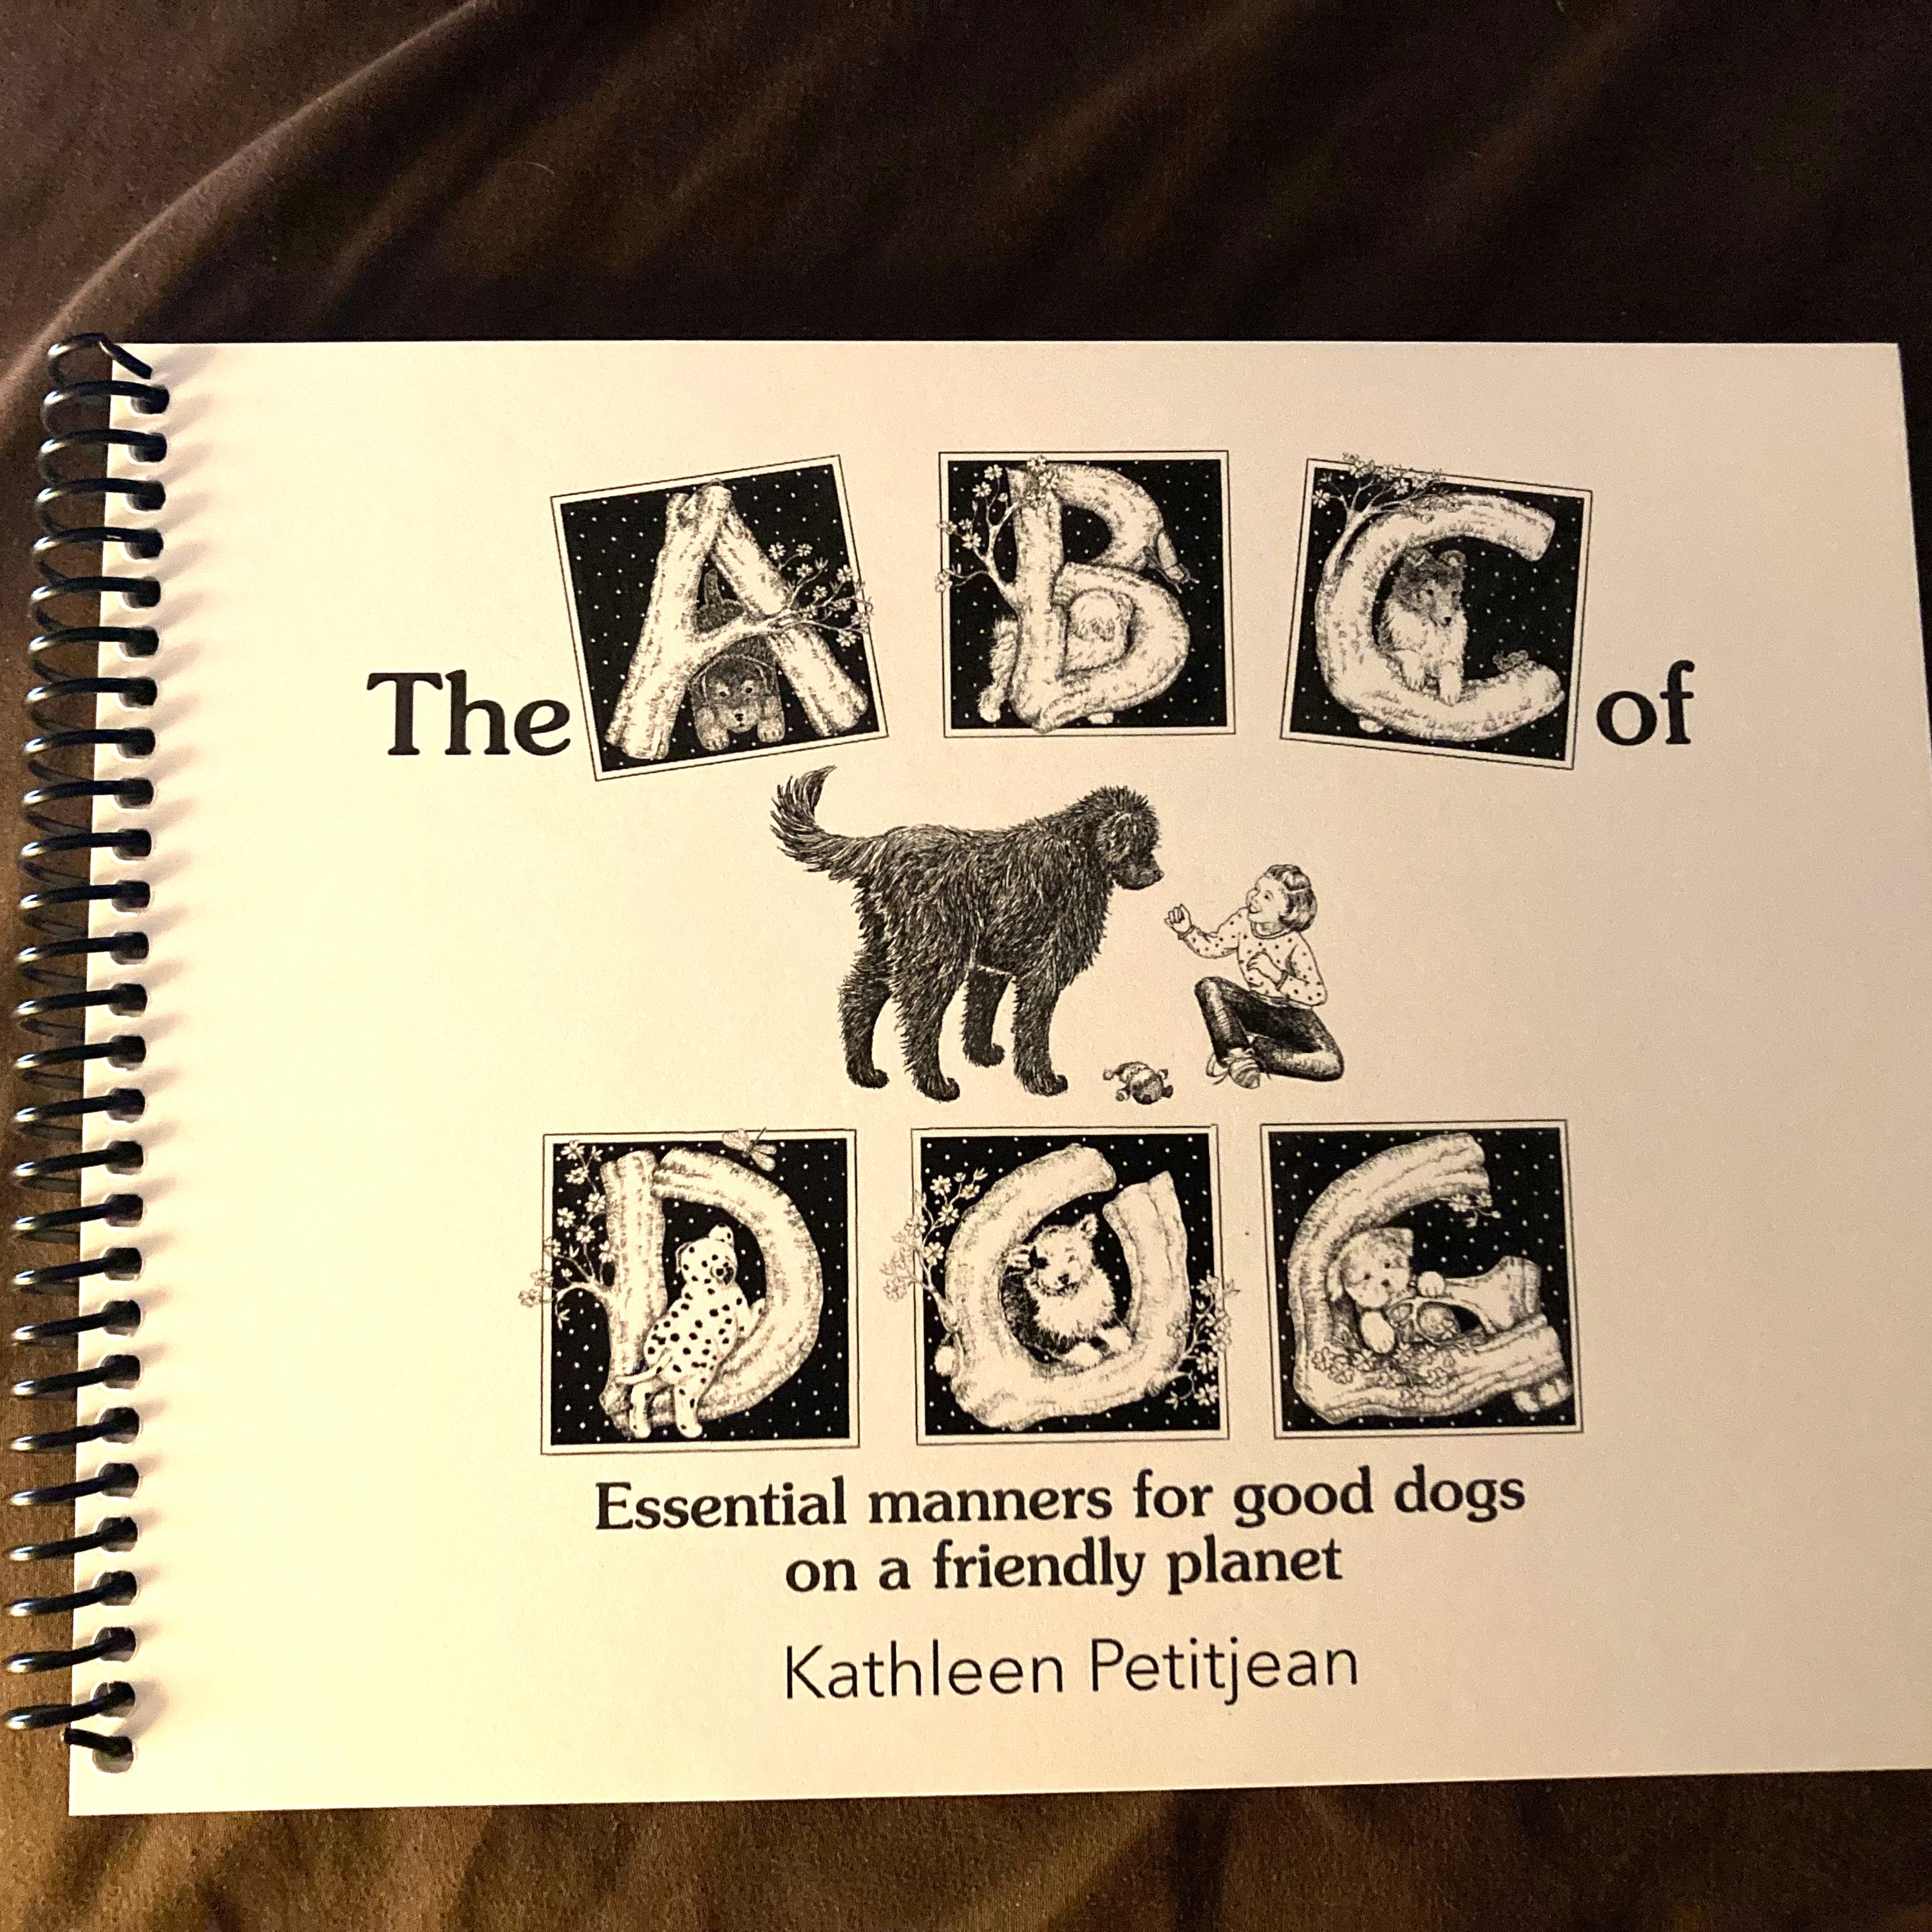 "The ABC of Dog: Essential manners for good dogs on a friendly planet"